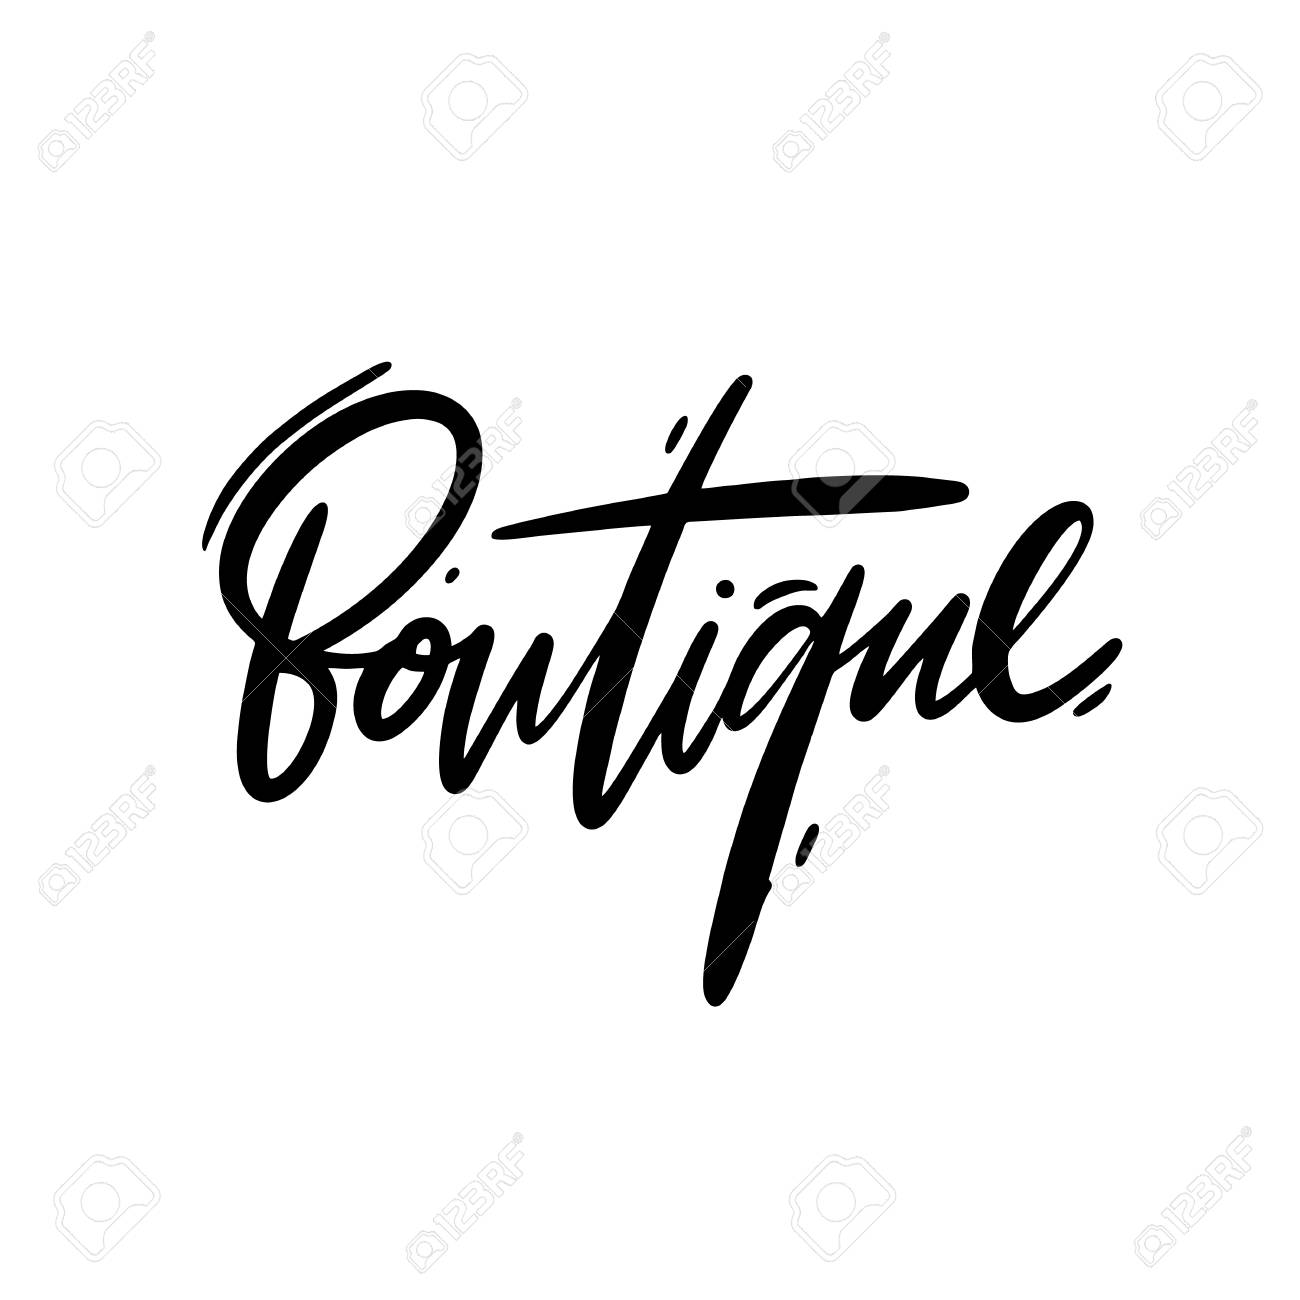 Boutique Hand Drawn Vector Lettering Isolated On White Background